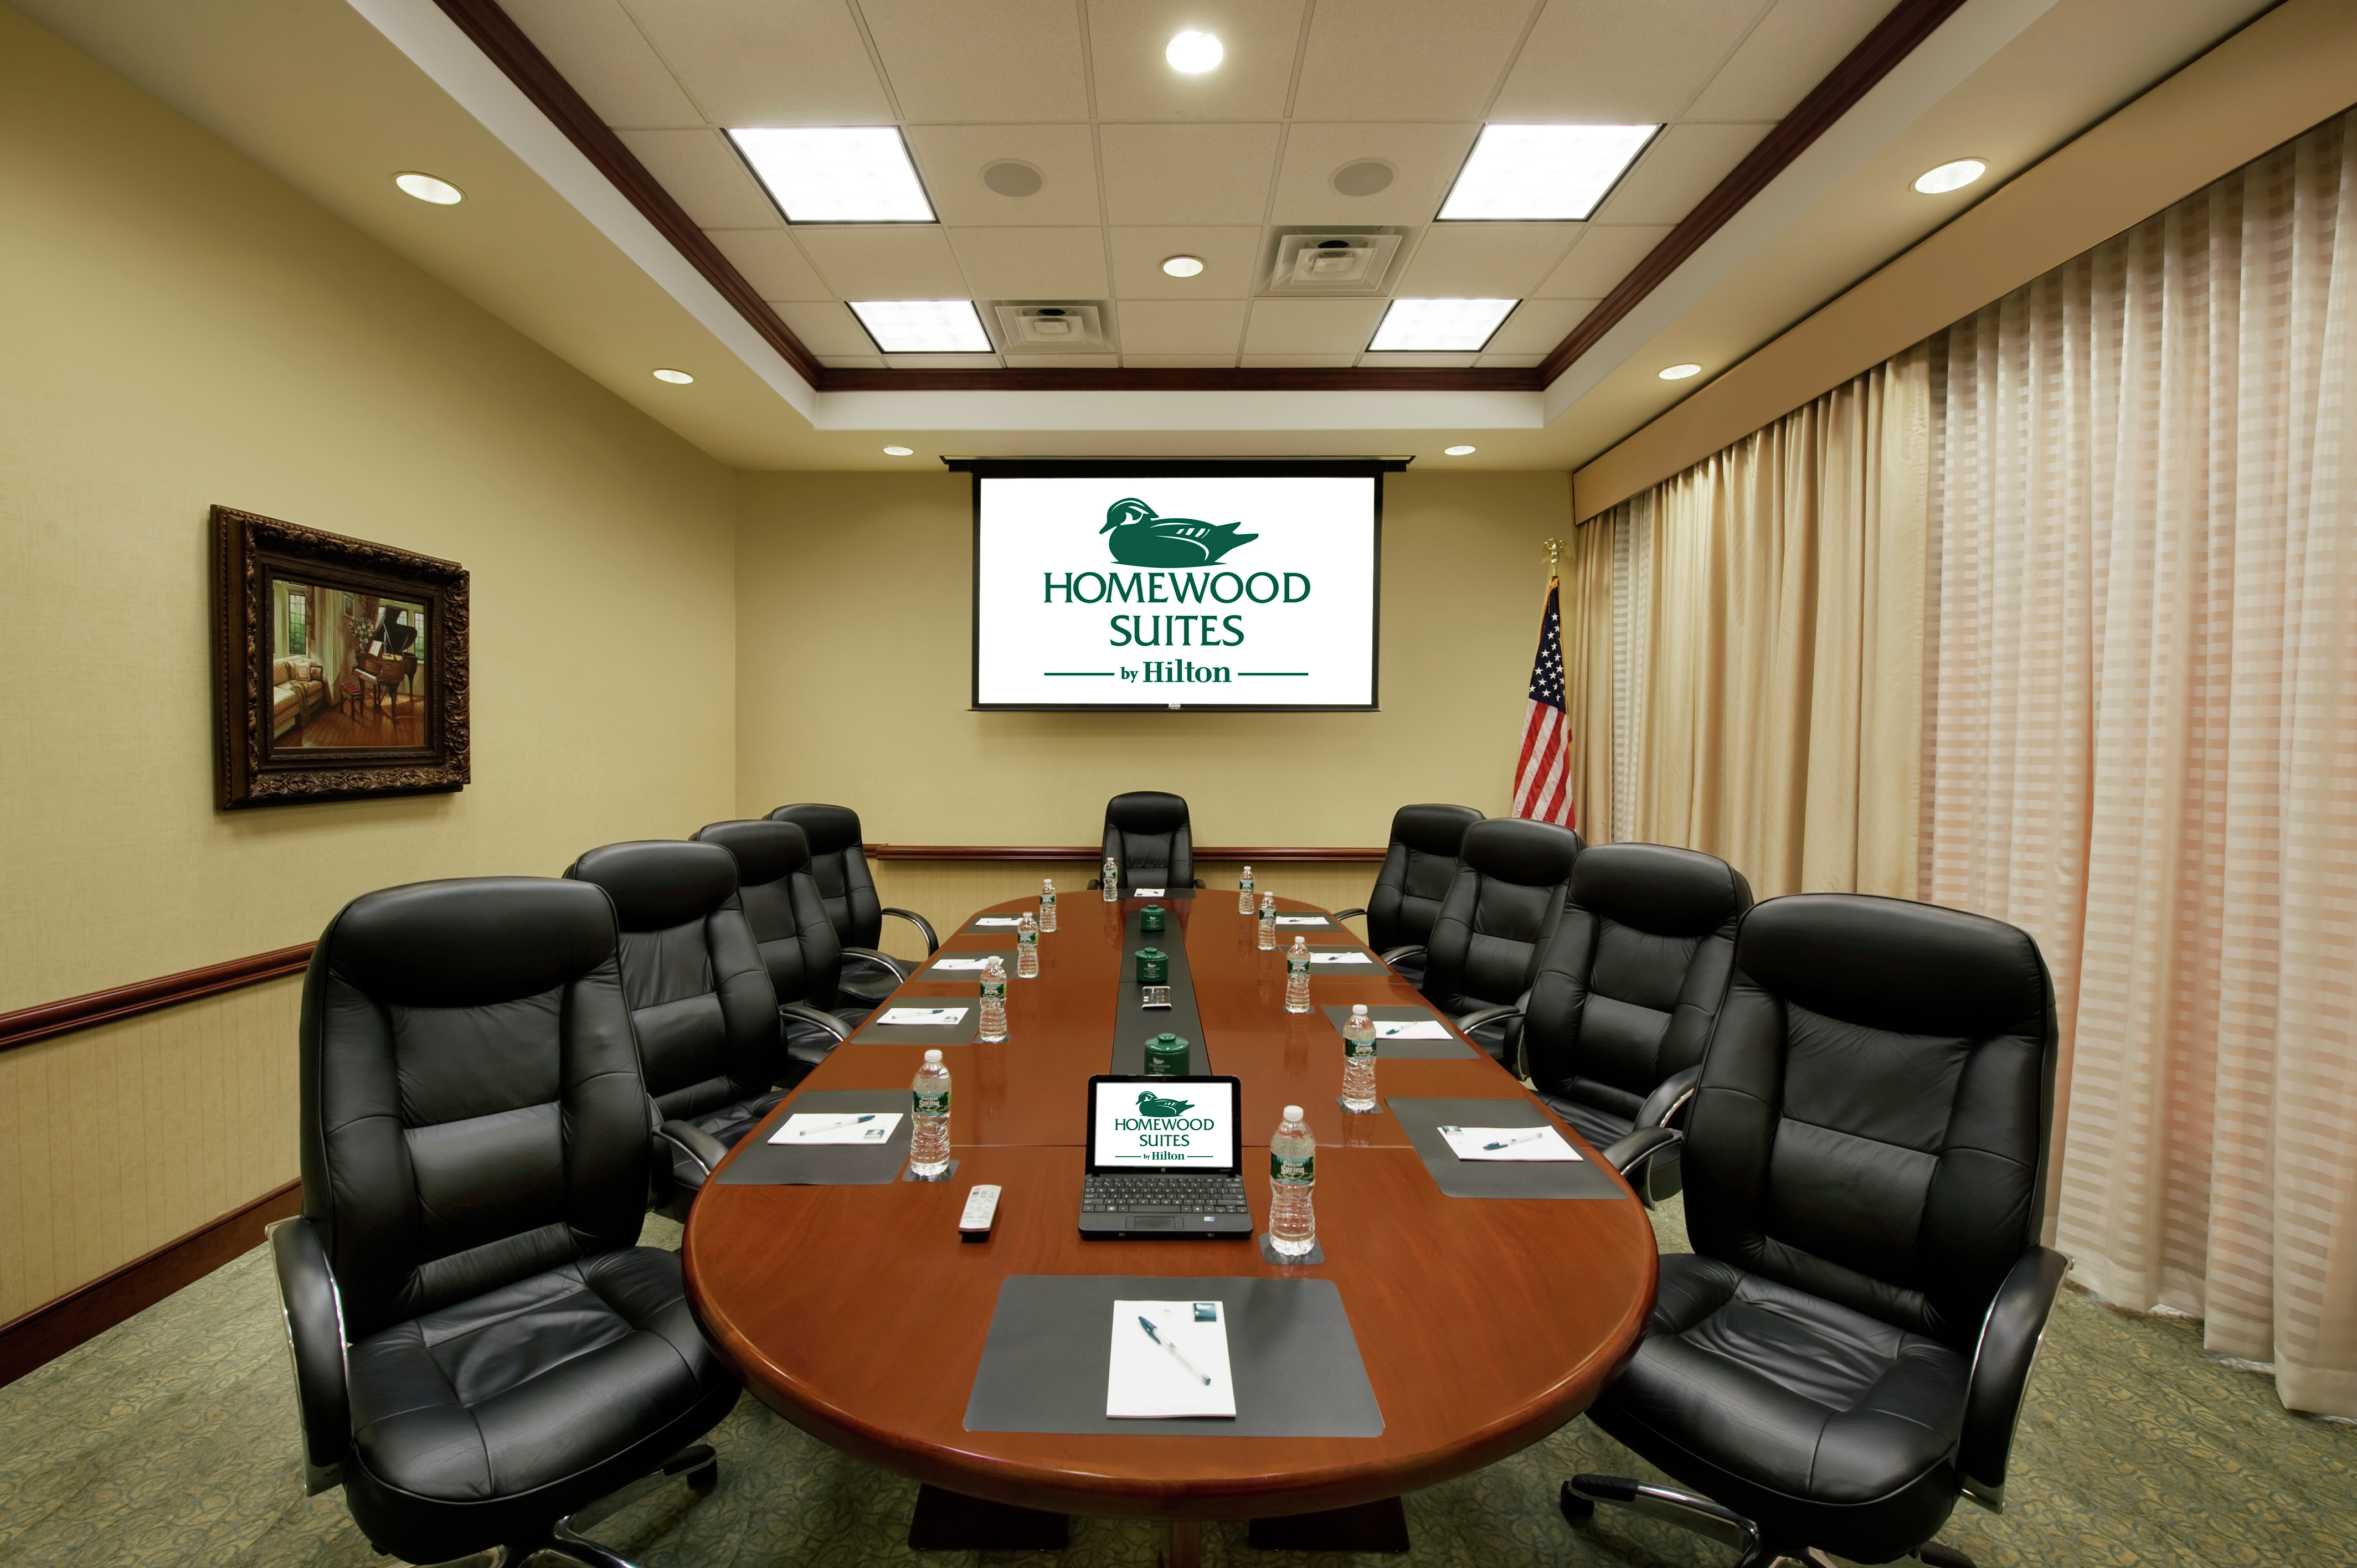 Homewood Suites by Hilton East Rutherford - Meadowlands, NJ - Harmony Boardroom